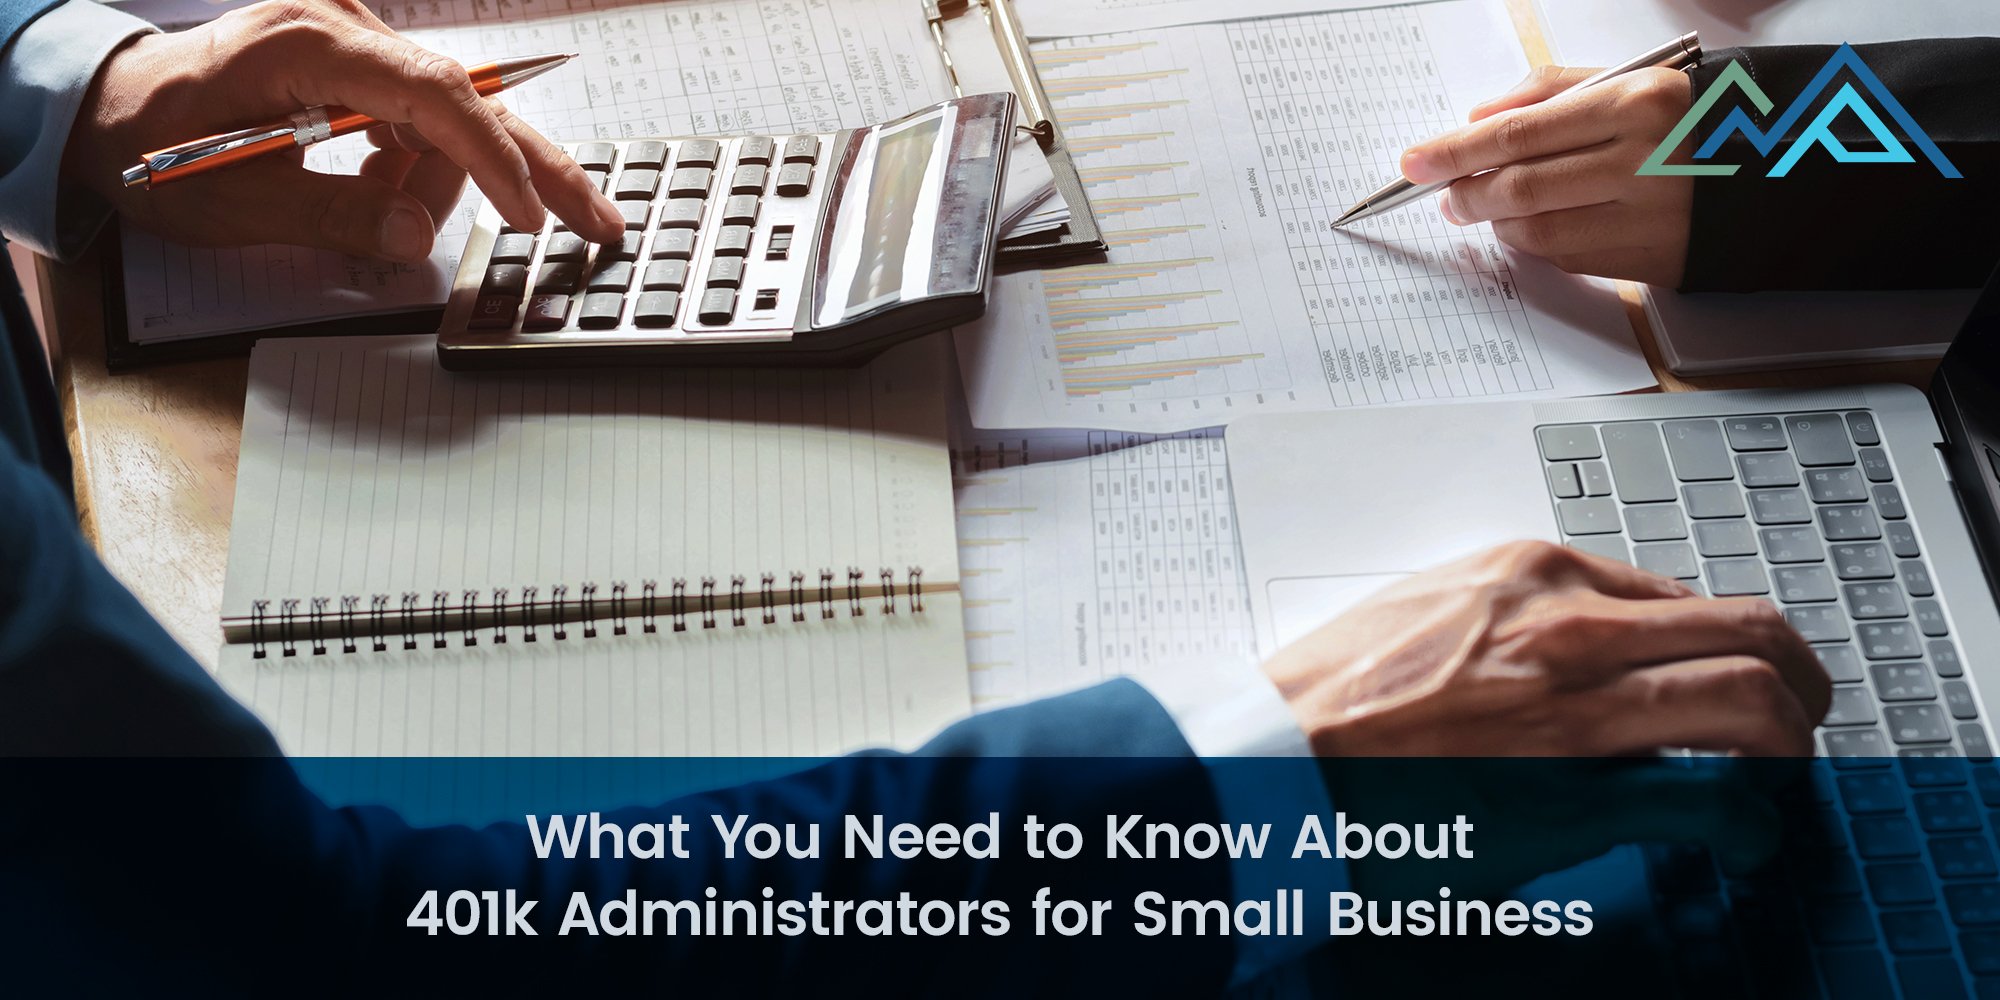 What You Need to Know About 401k Administrators for Small Business